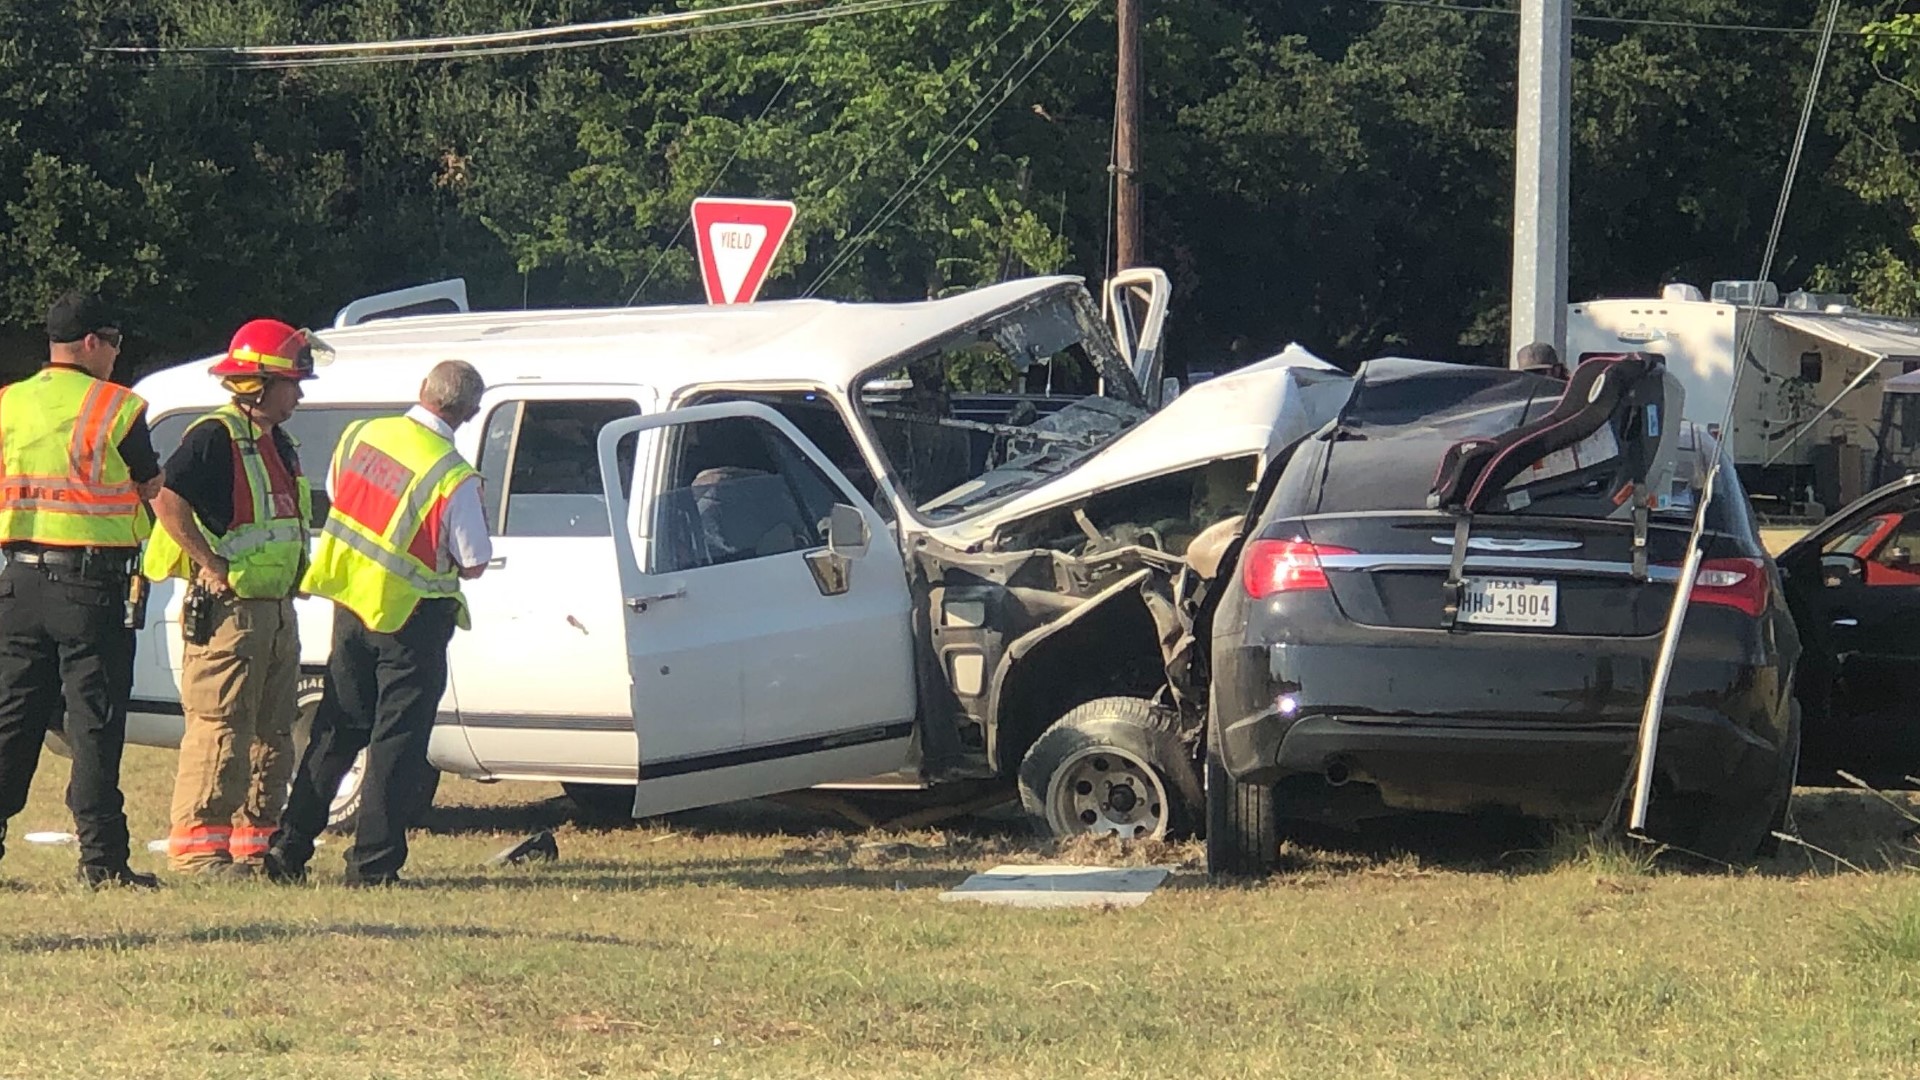 The crash happened just before 5 p.m. at the intersection of FM 3219 and FM 439 in Harker Heights.